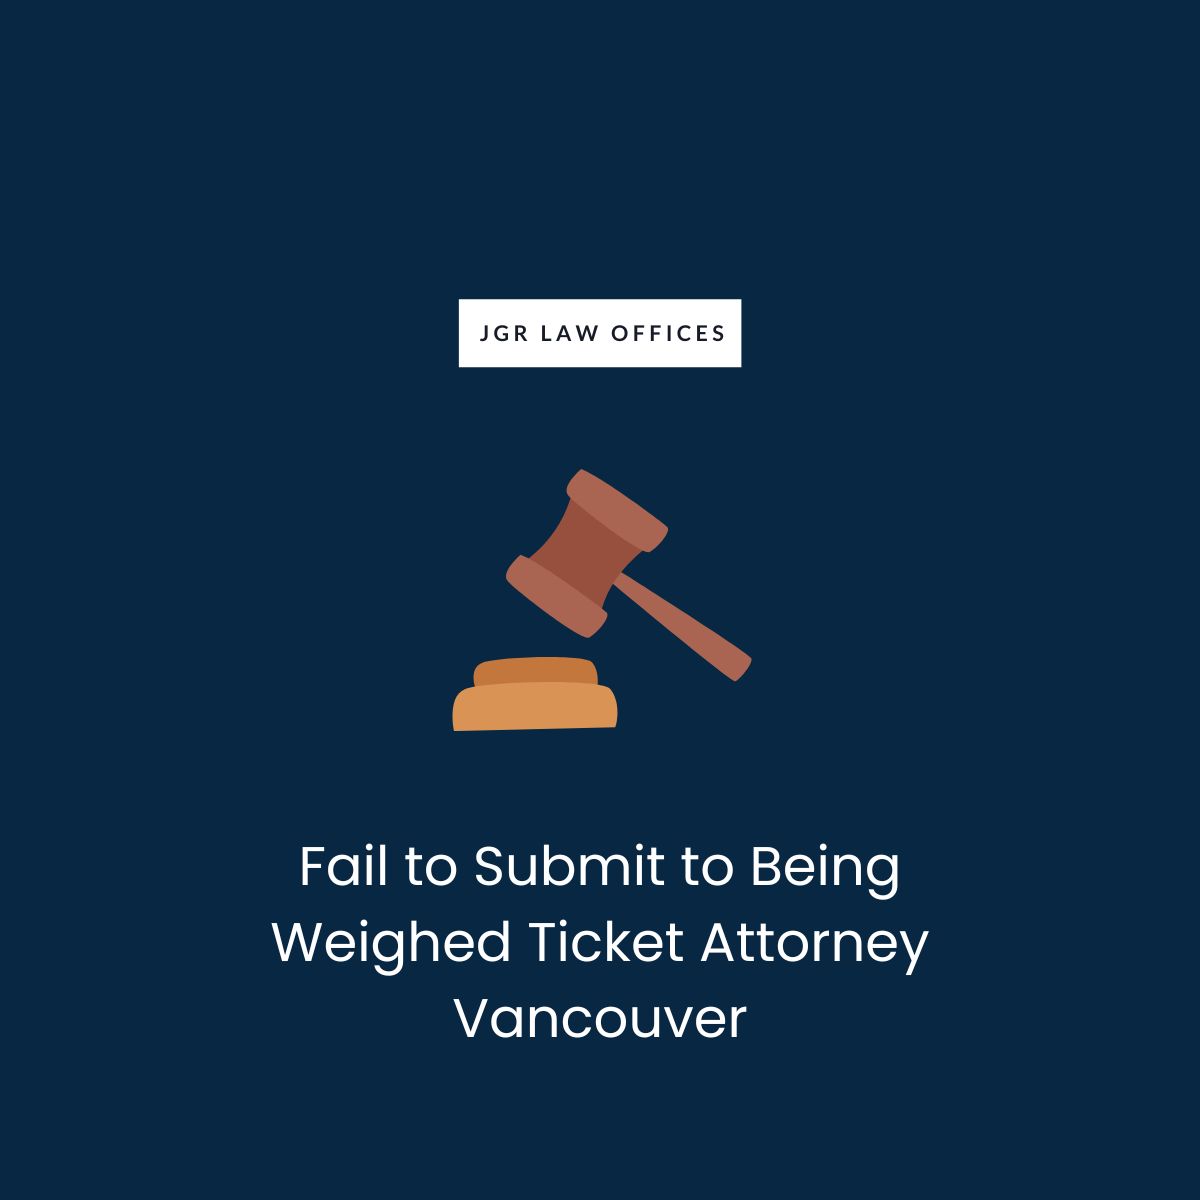 Fail to Submit to Being Weighed Ticket Attorney Vancouver